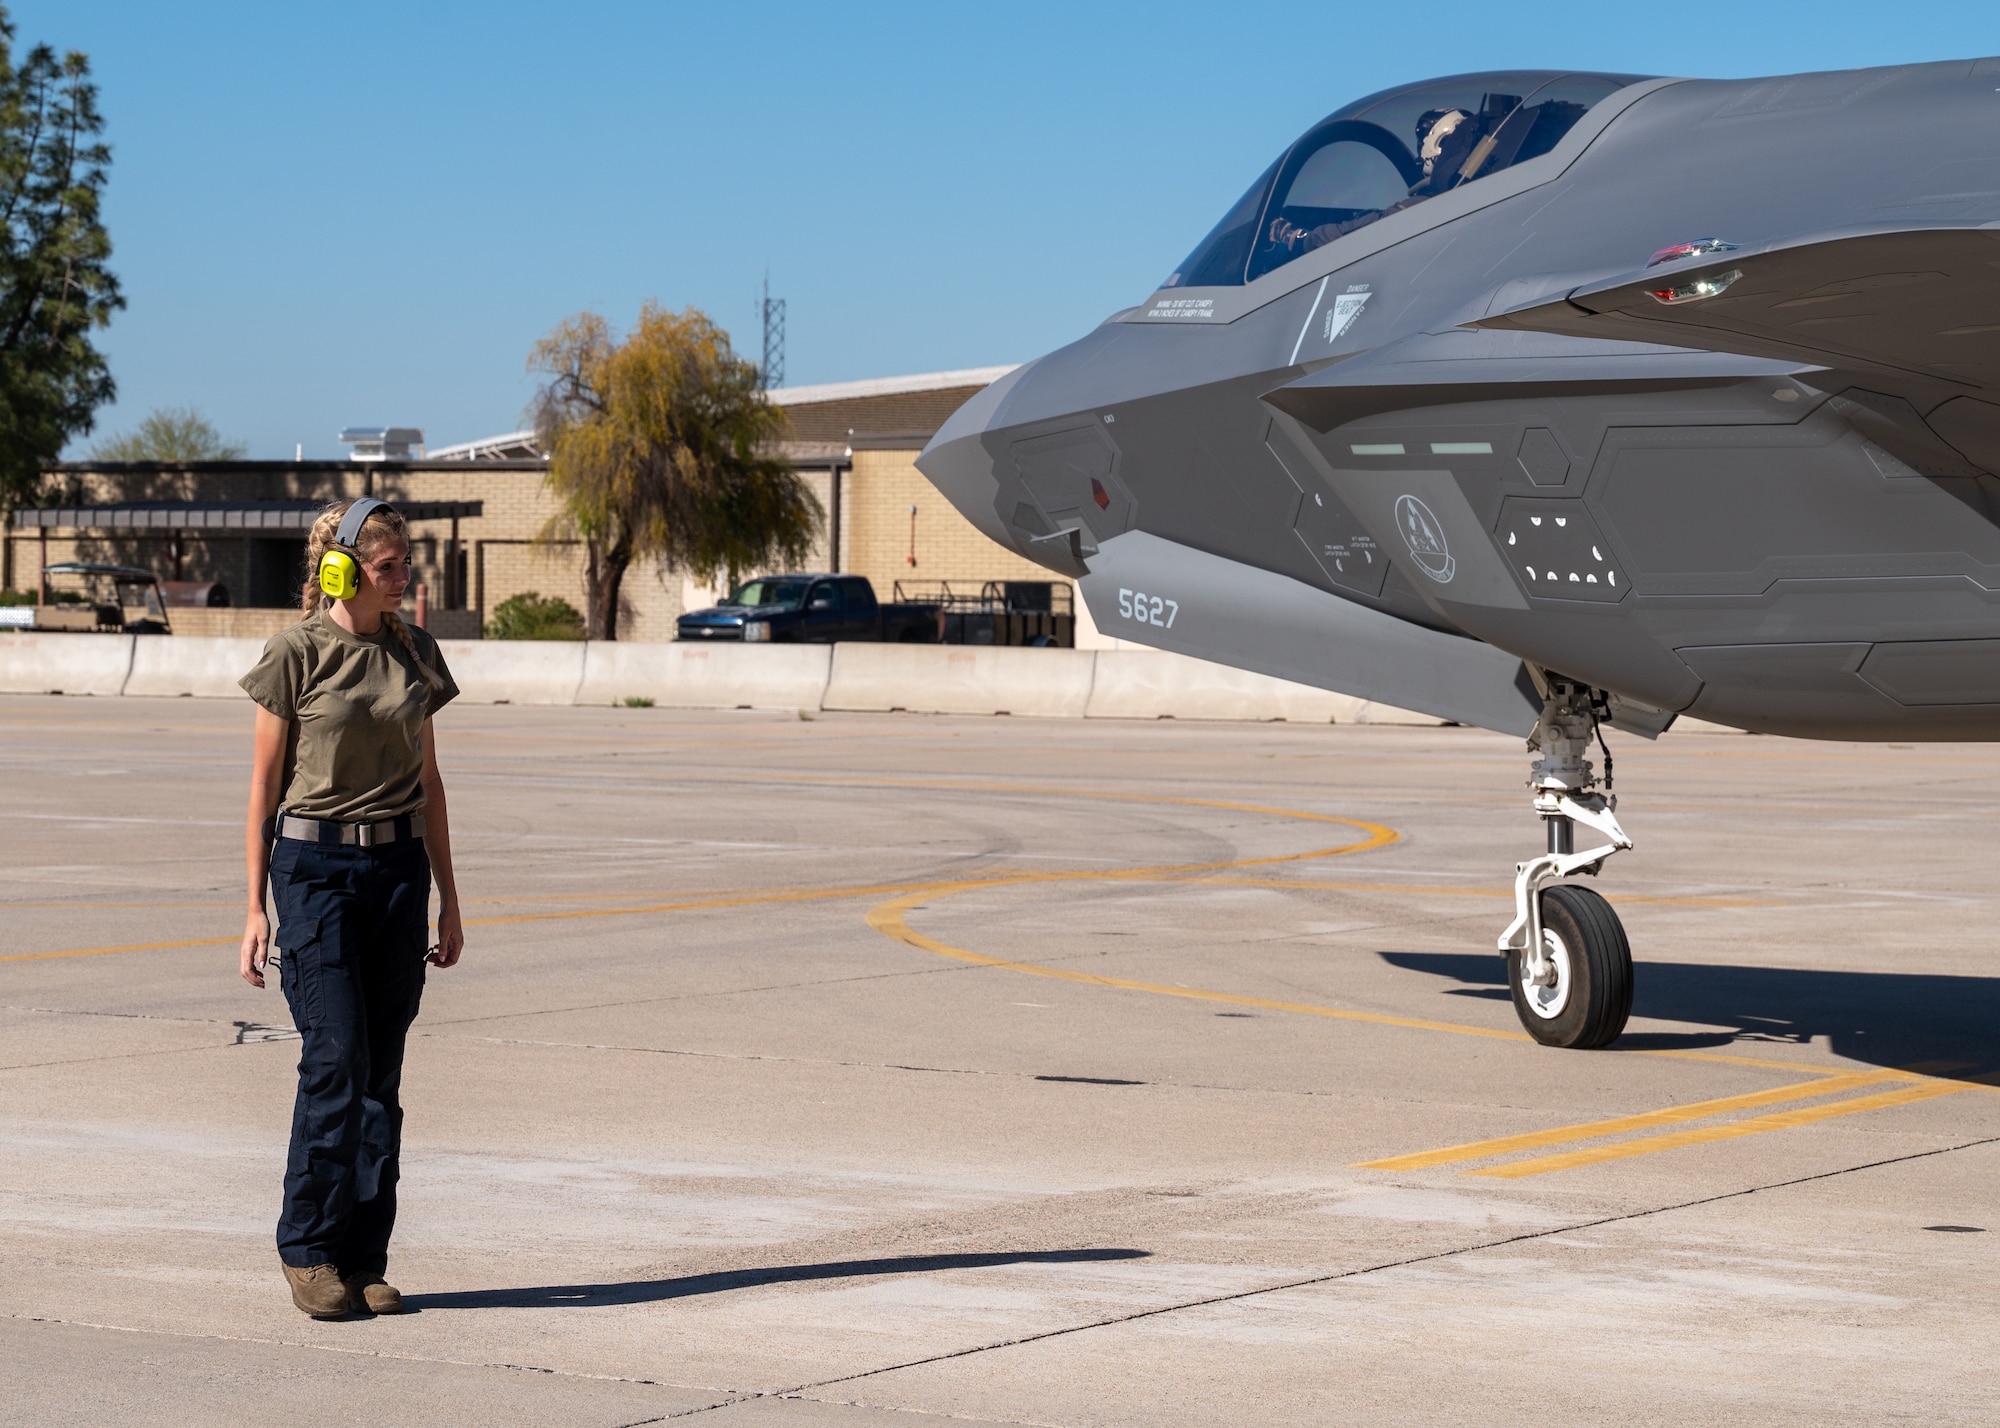 U.S. Air Force Staff Sgt. Paige Mitchell, 61st Fighter Squadron F-35 crew chief conducts a walk-around inspection of an F-35 at Luke Air Force Base, Arizona, Mar. 28, 2023.